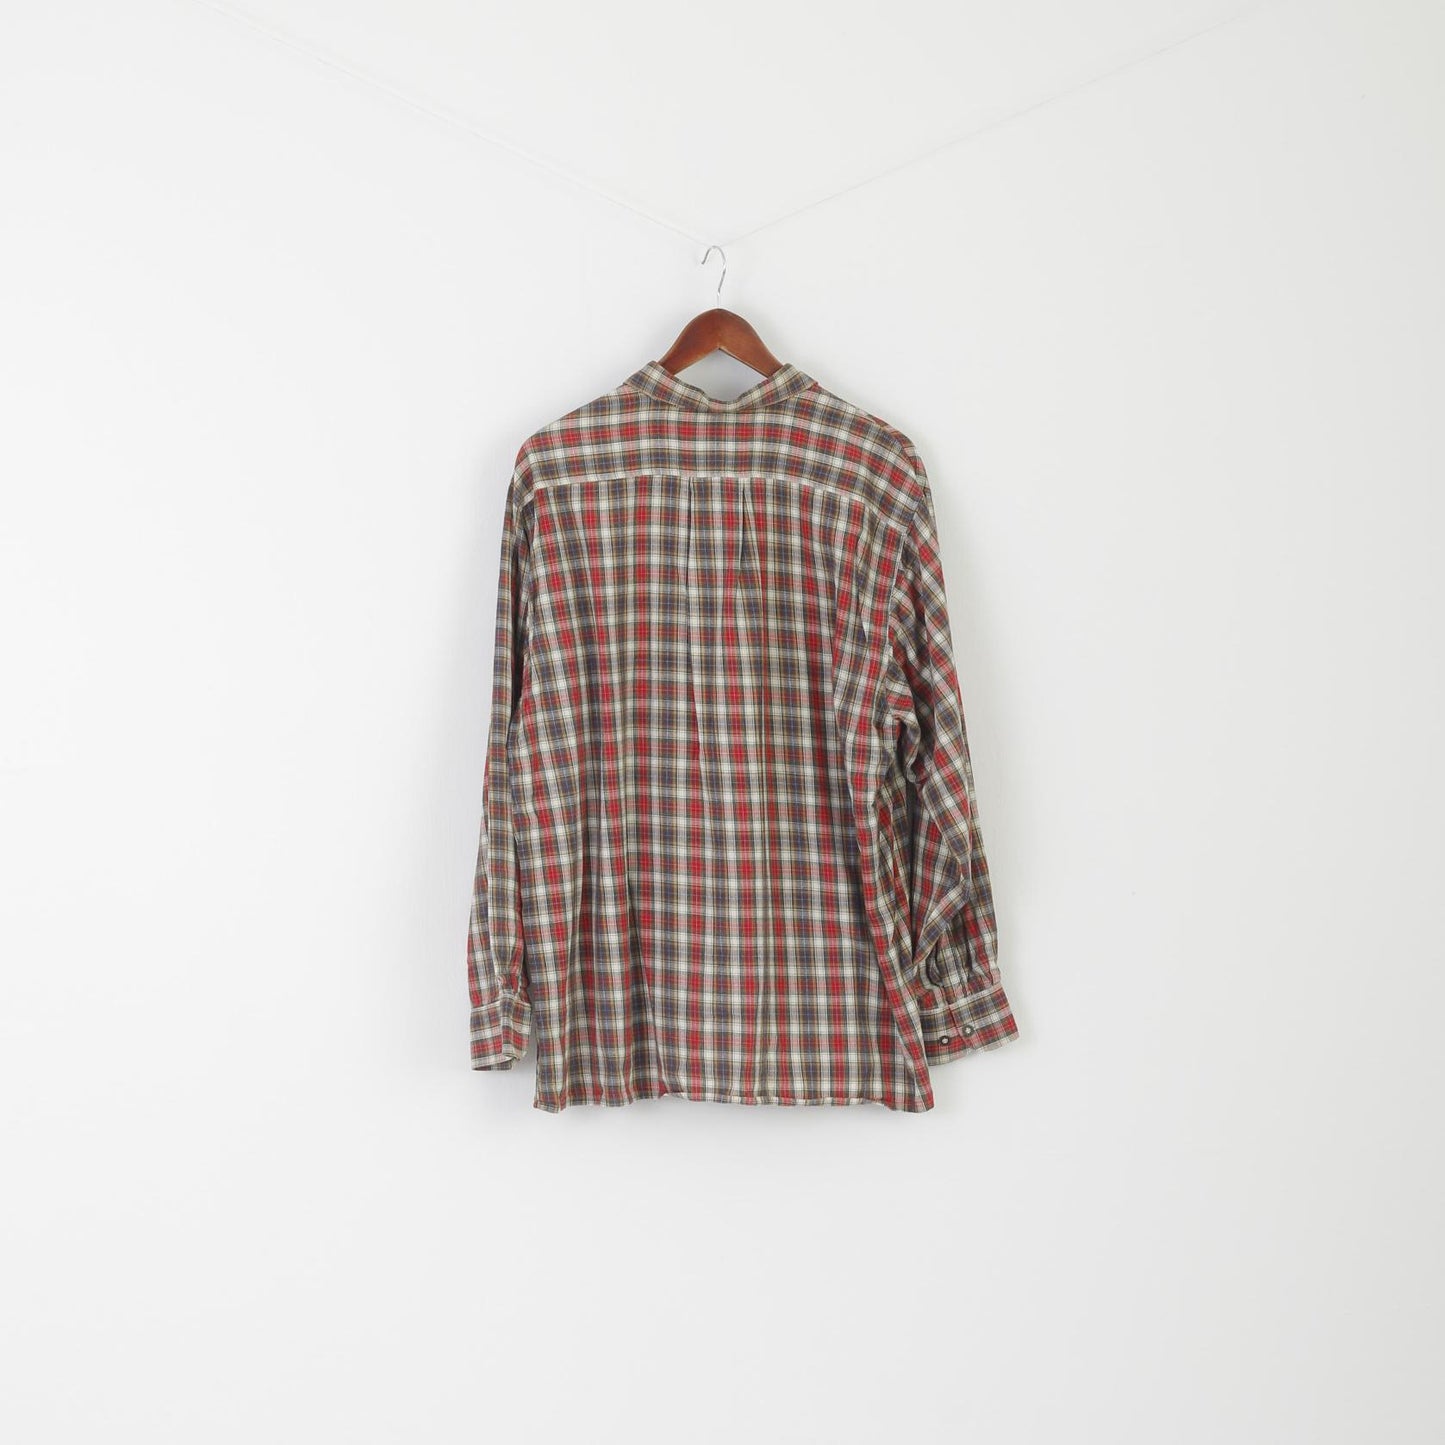 Imperial Men 43 2XL Casual Shirt Red Check Canadian Style Rocky Muntain Vintage Top